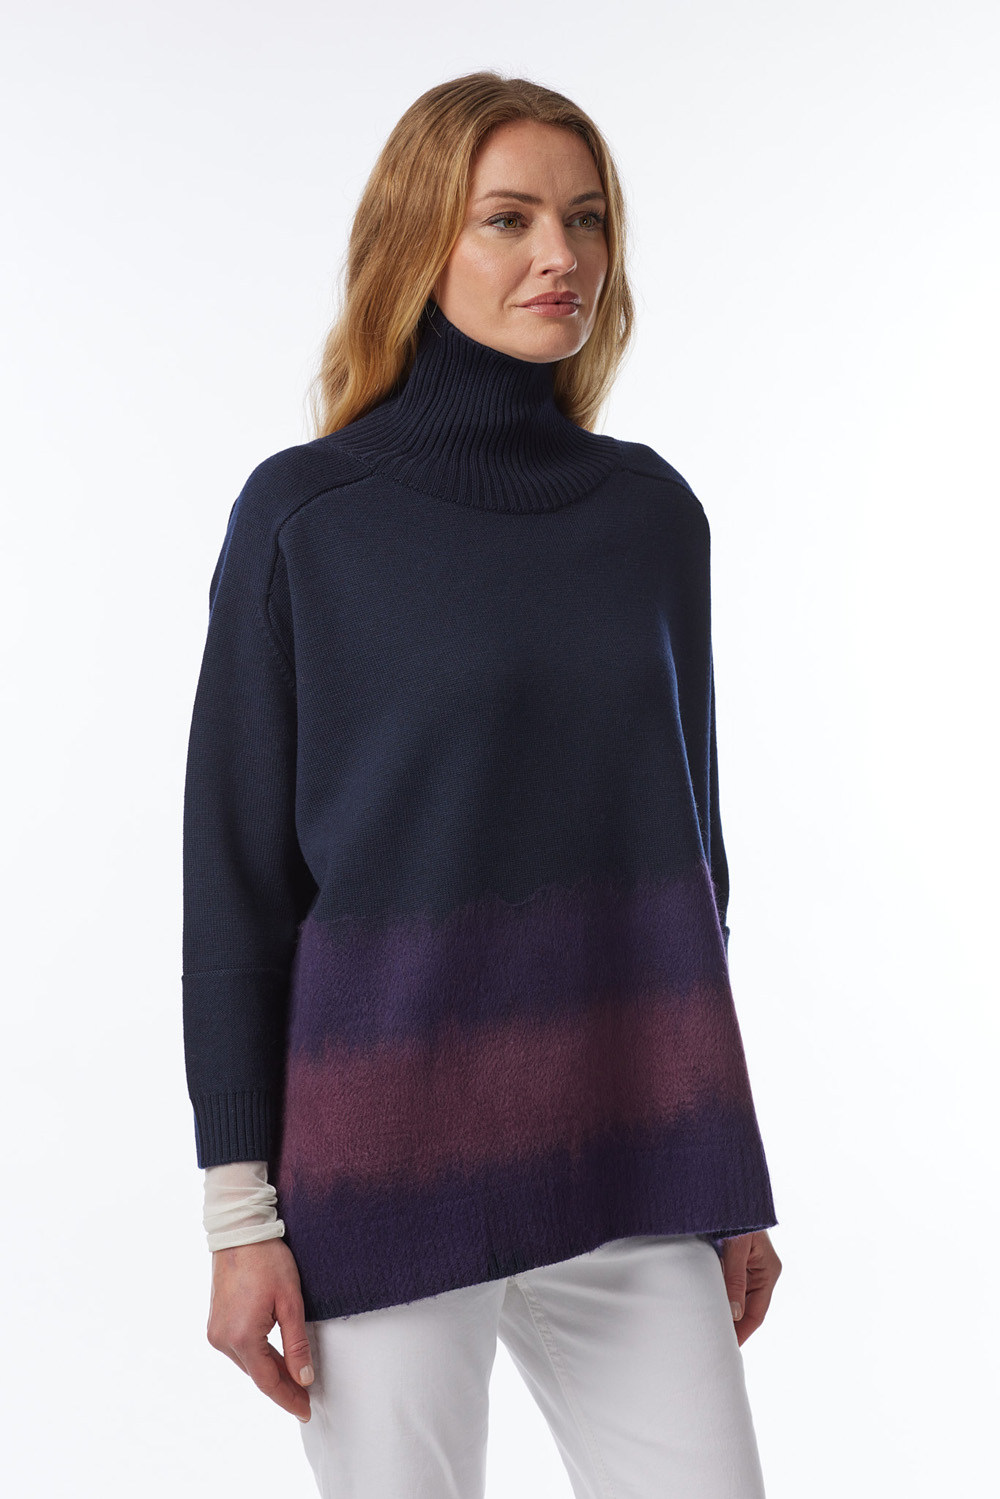 turtle neck sweater in extrafine merino, with a needle-punched motif on the front and back